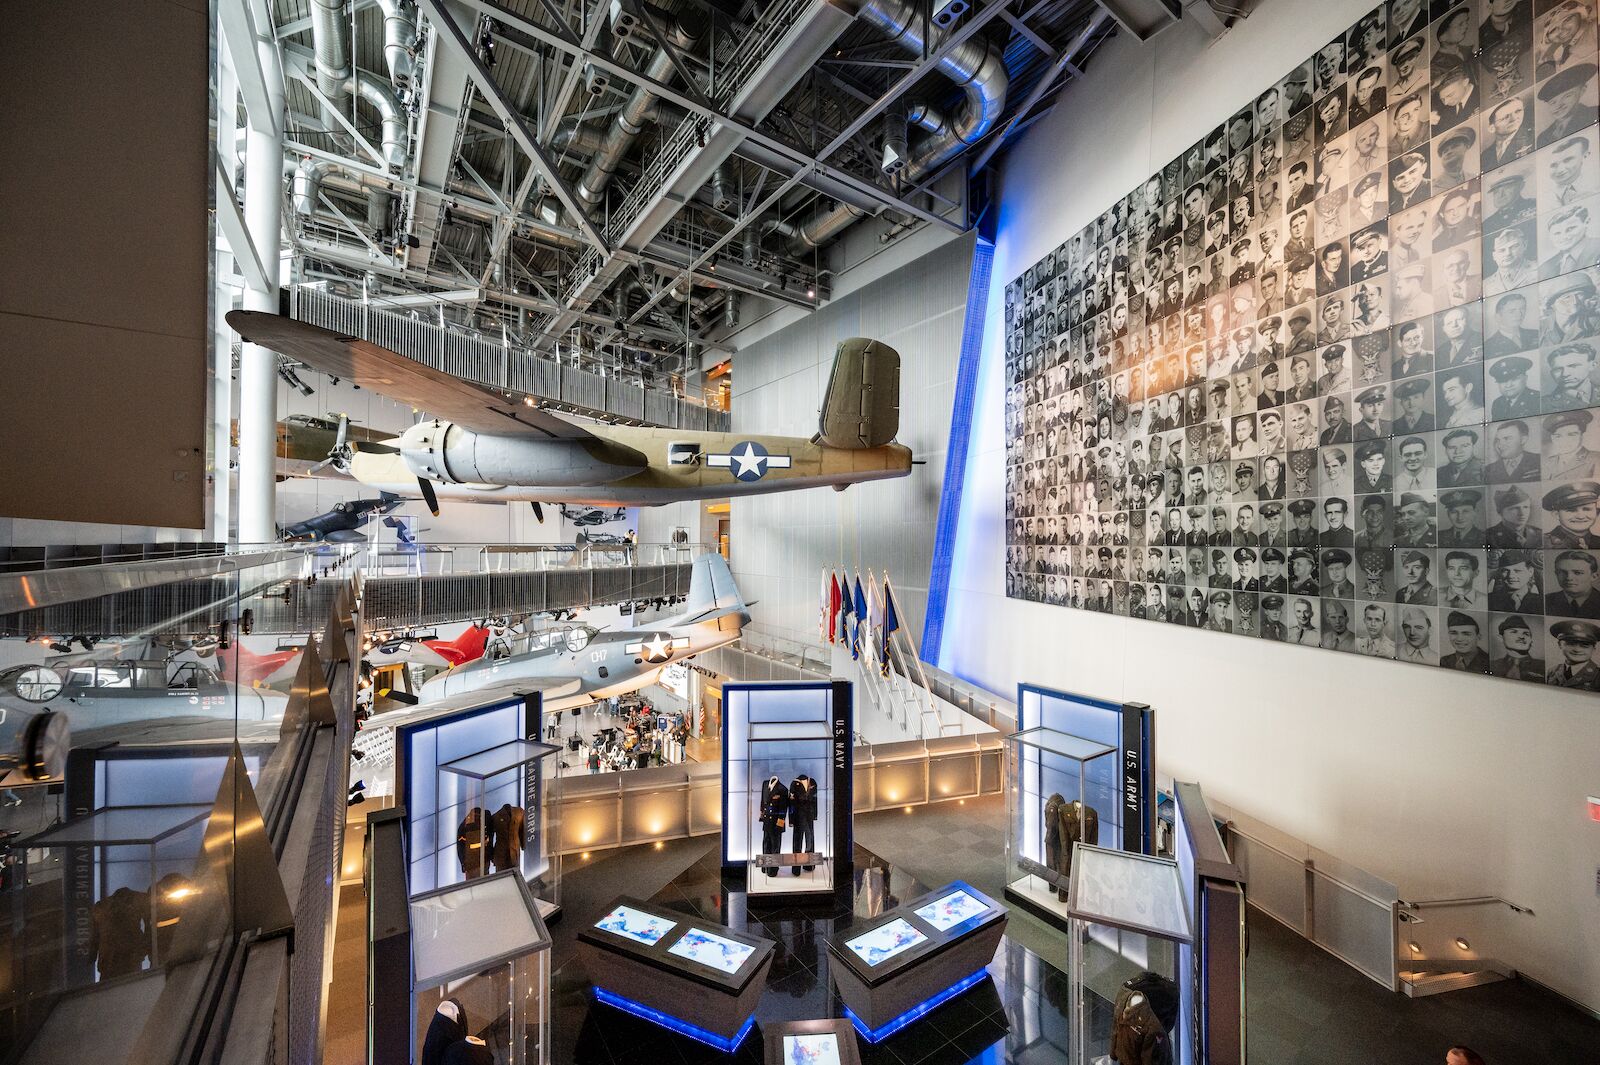 View from the second-floor catwalk in the US Freedom Pavilion at the National WWII Museum